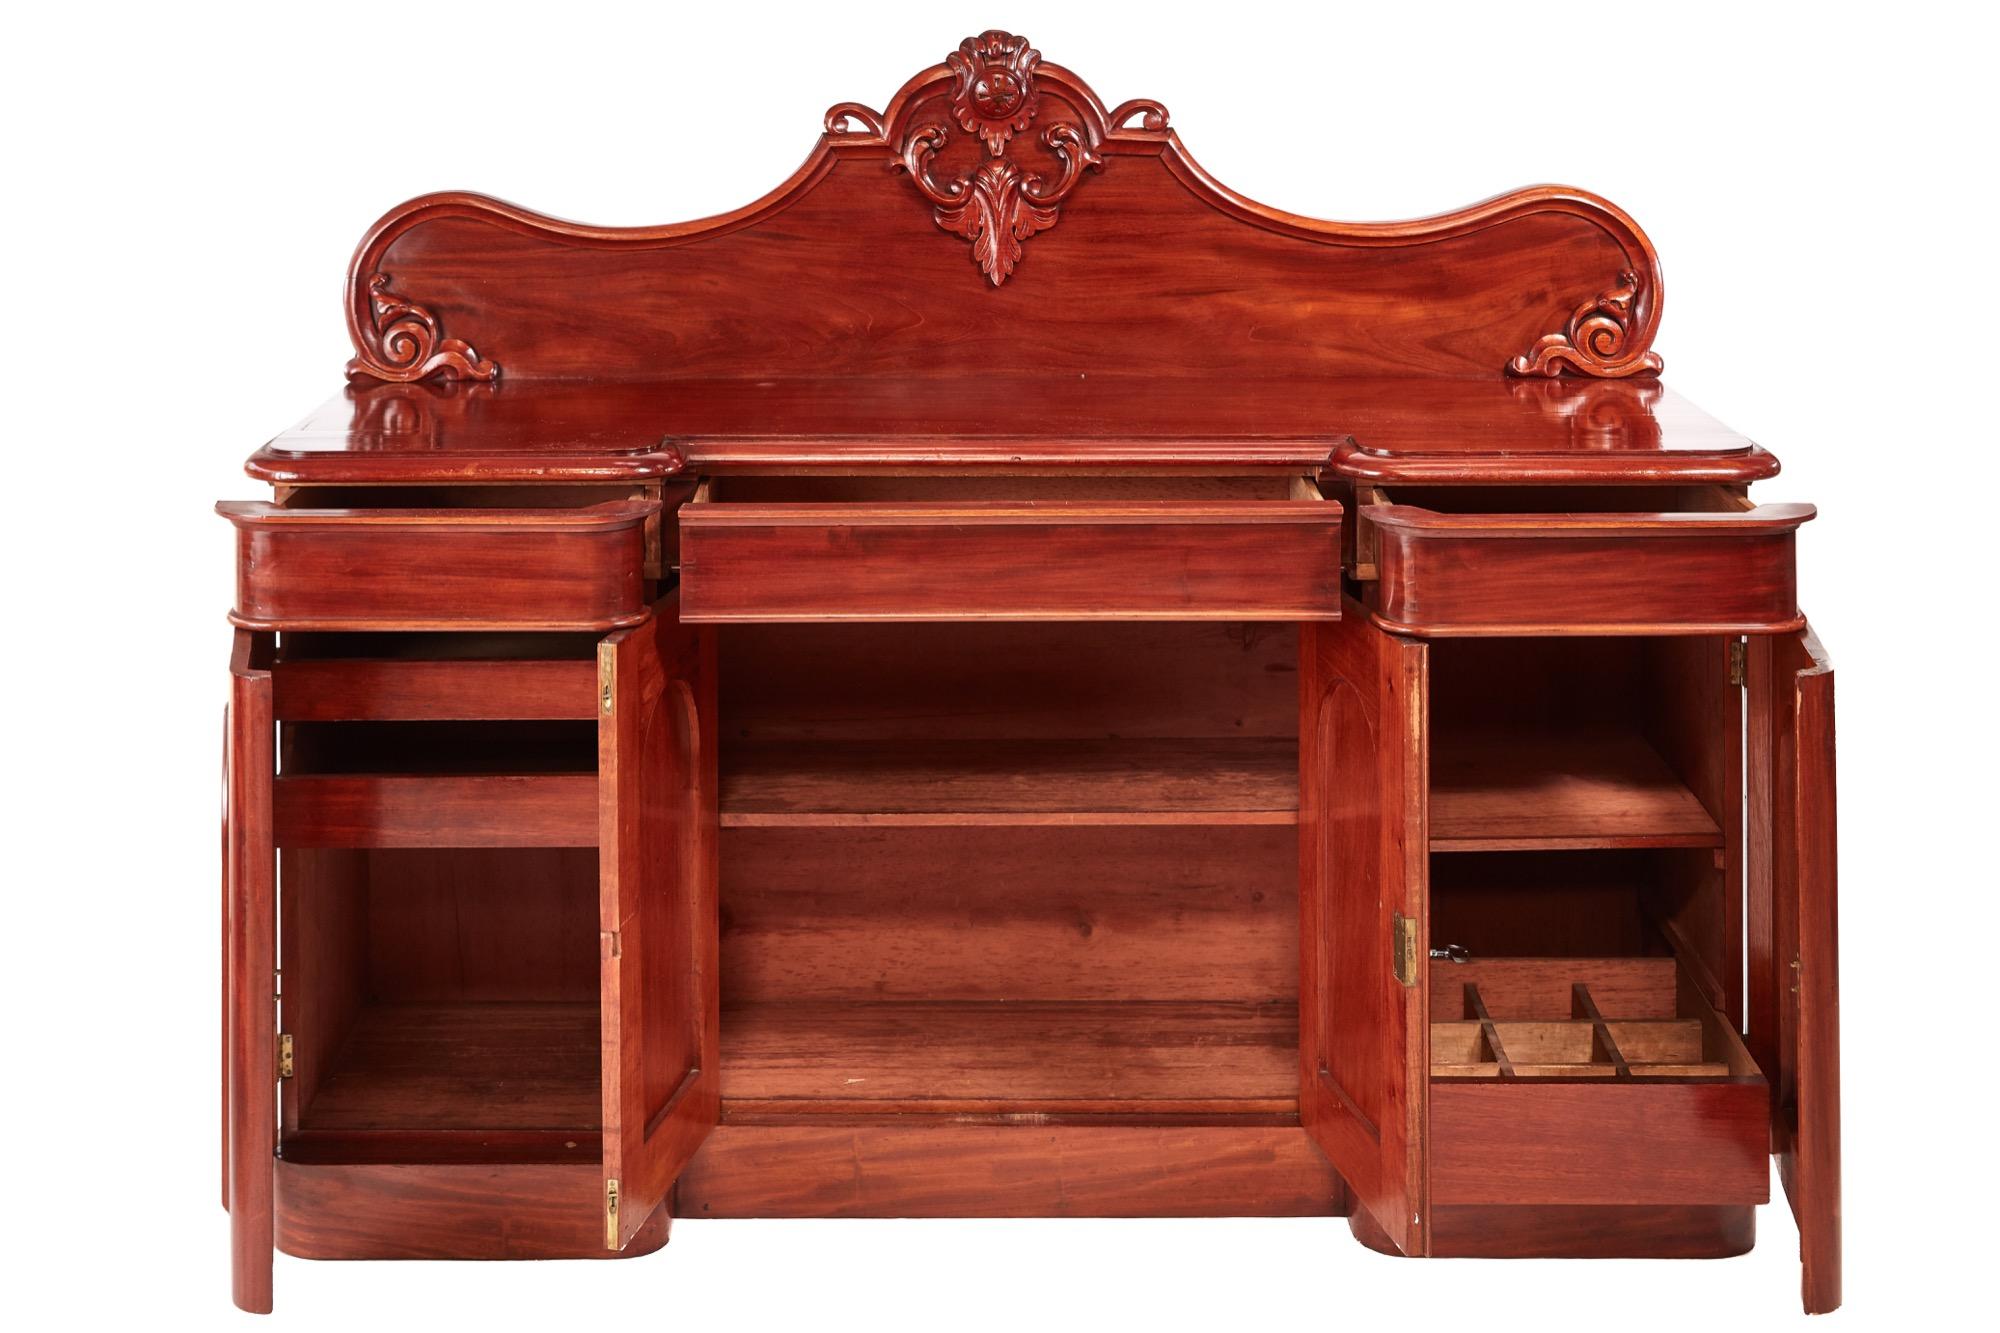 A fine quality antique 19th century Victorian antique carved mahogany sideboard with a delightful shaped carved back, excellent quality mahogany top, three frieze drawers, four quality figured mahogany paneled door. The fitted interior is of the